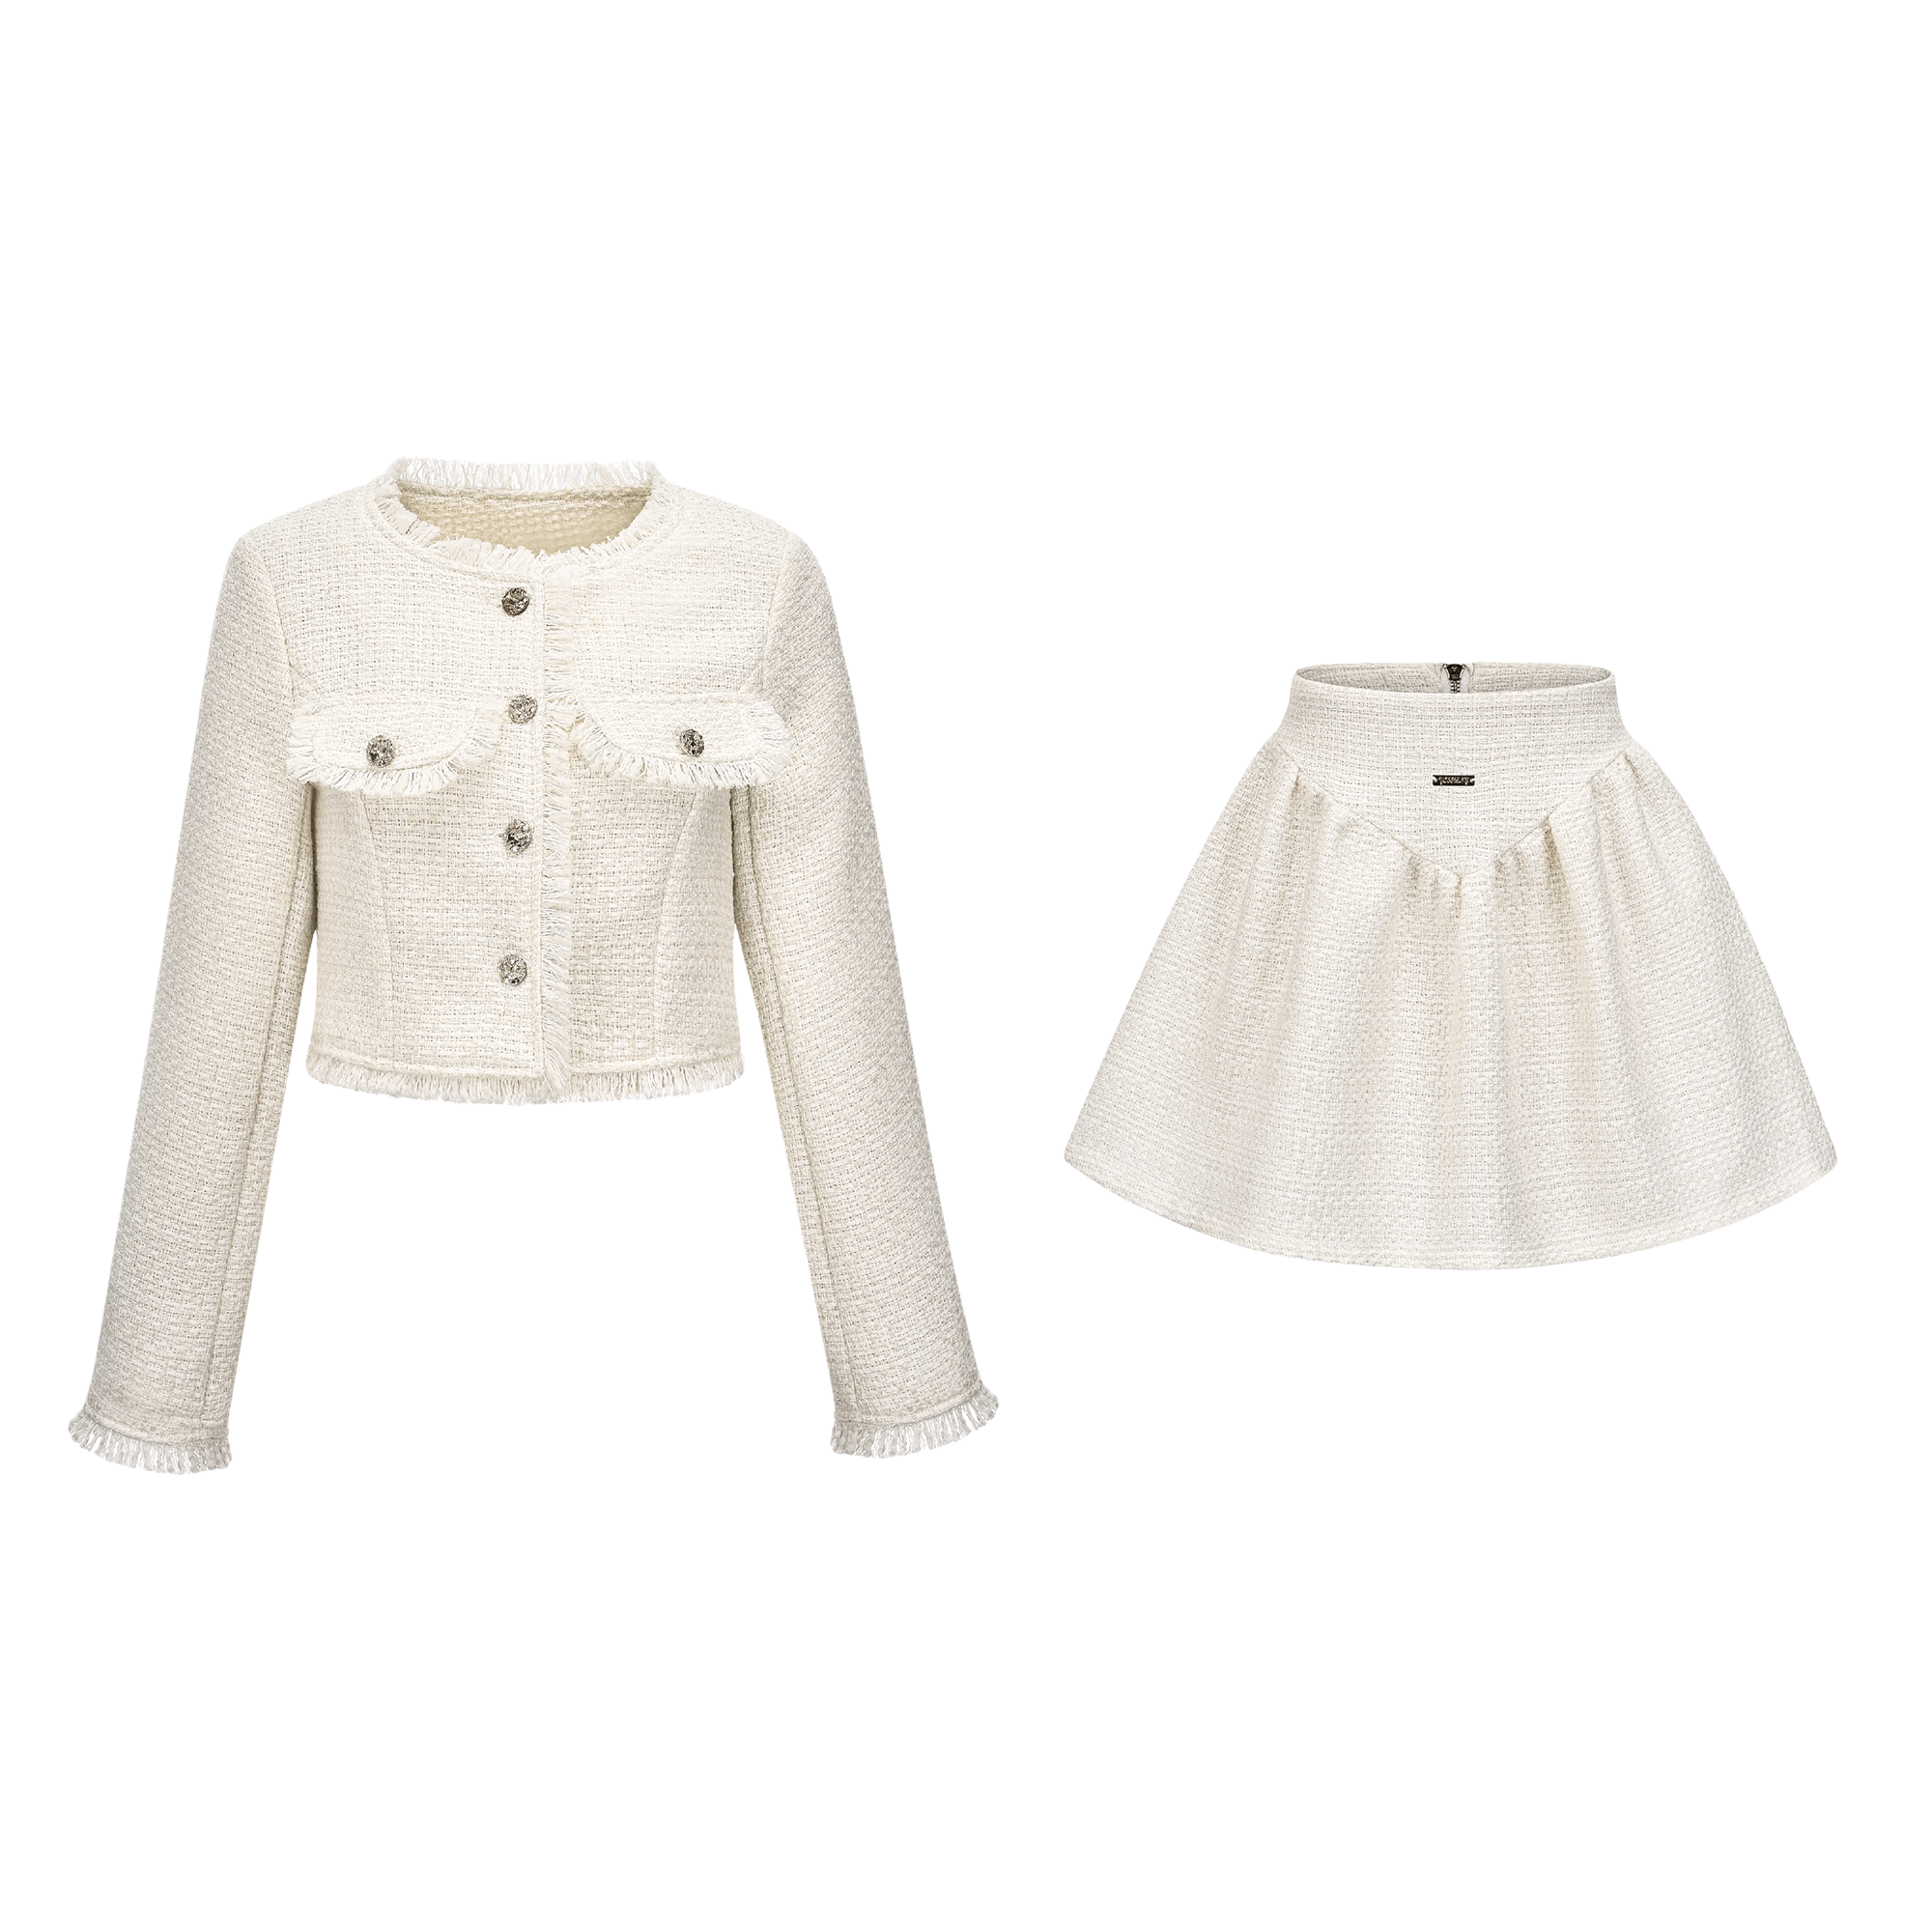 Fringe-trim knitted cropped jacket & skirt matching set - itsy, it‘s different